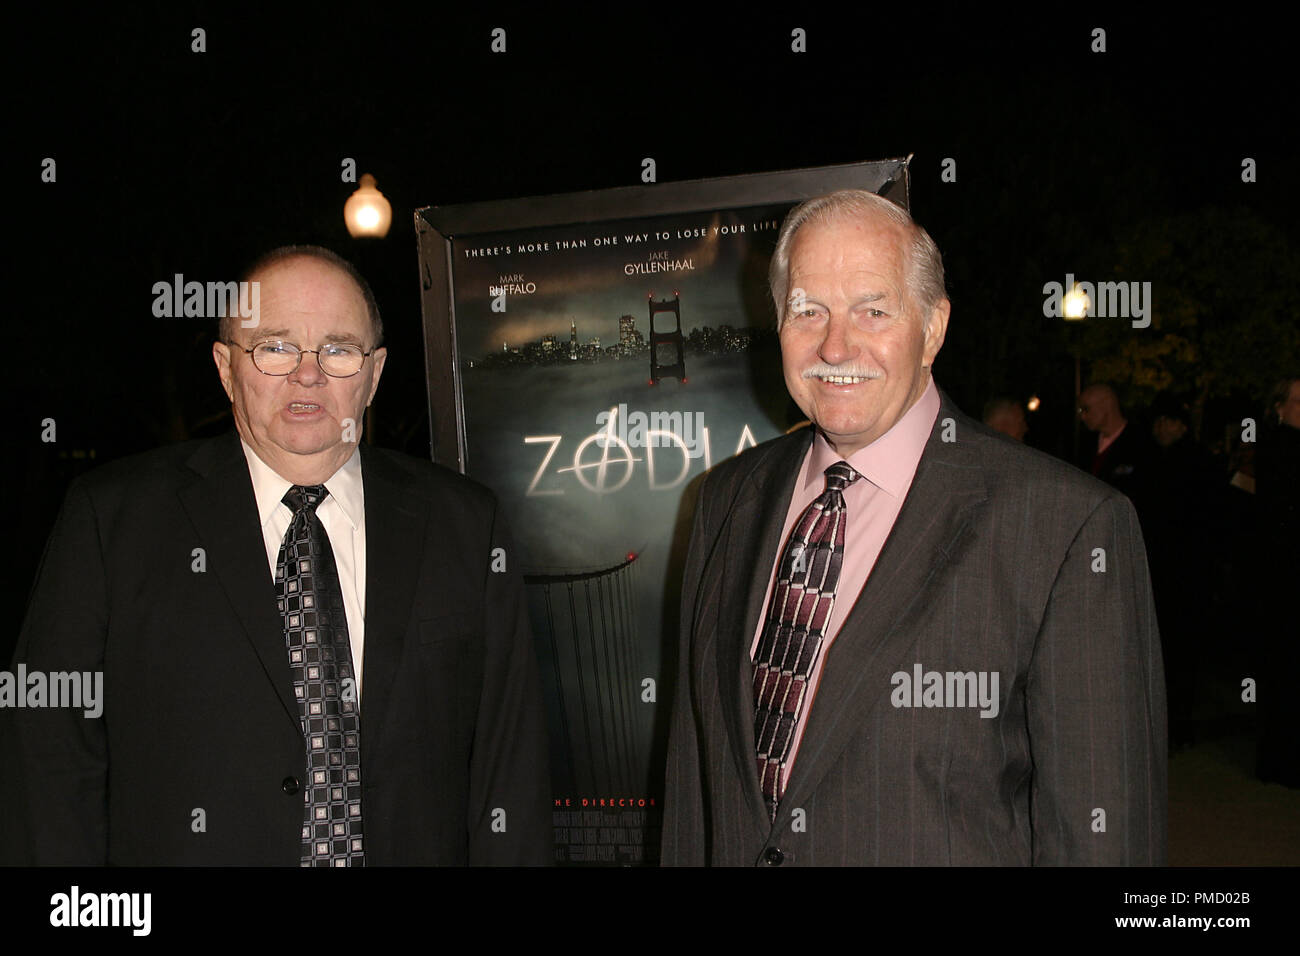 Zodiac (Premiere) George Bower, Ken Narlow 3-1-2007 / Paramount Theatre /  Hollywood, CA / Paramount / Photo by Joseph Martinez - All Rights Reserved  File Reference # 22939 0008PLX For Editorial Use Only Stock Photo - Alamy